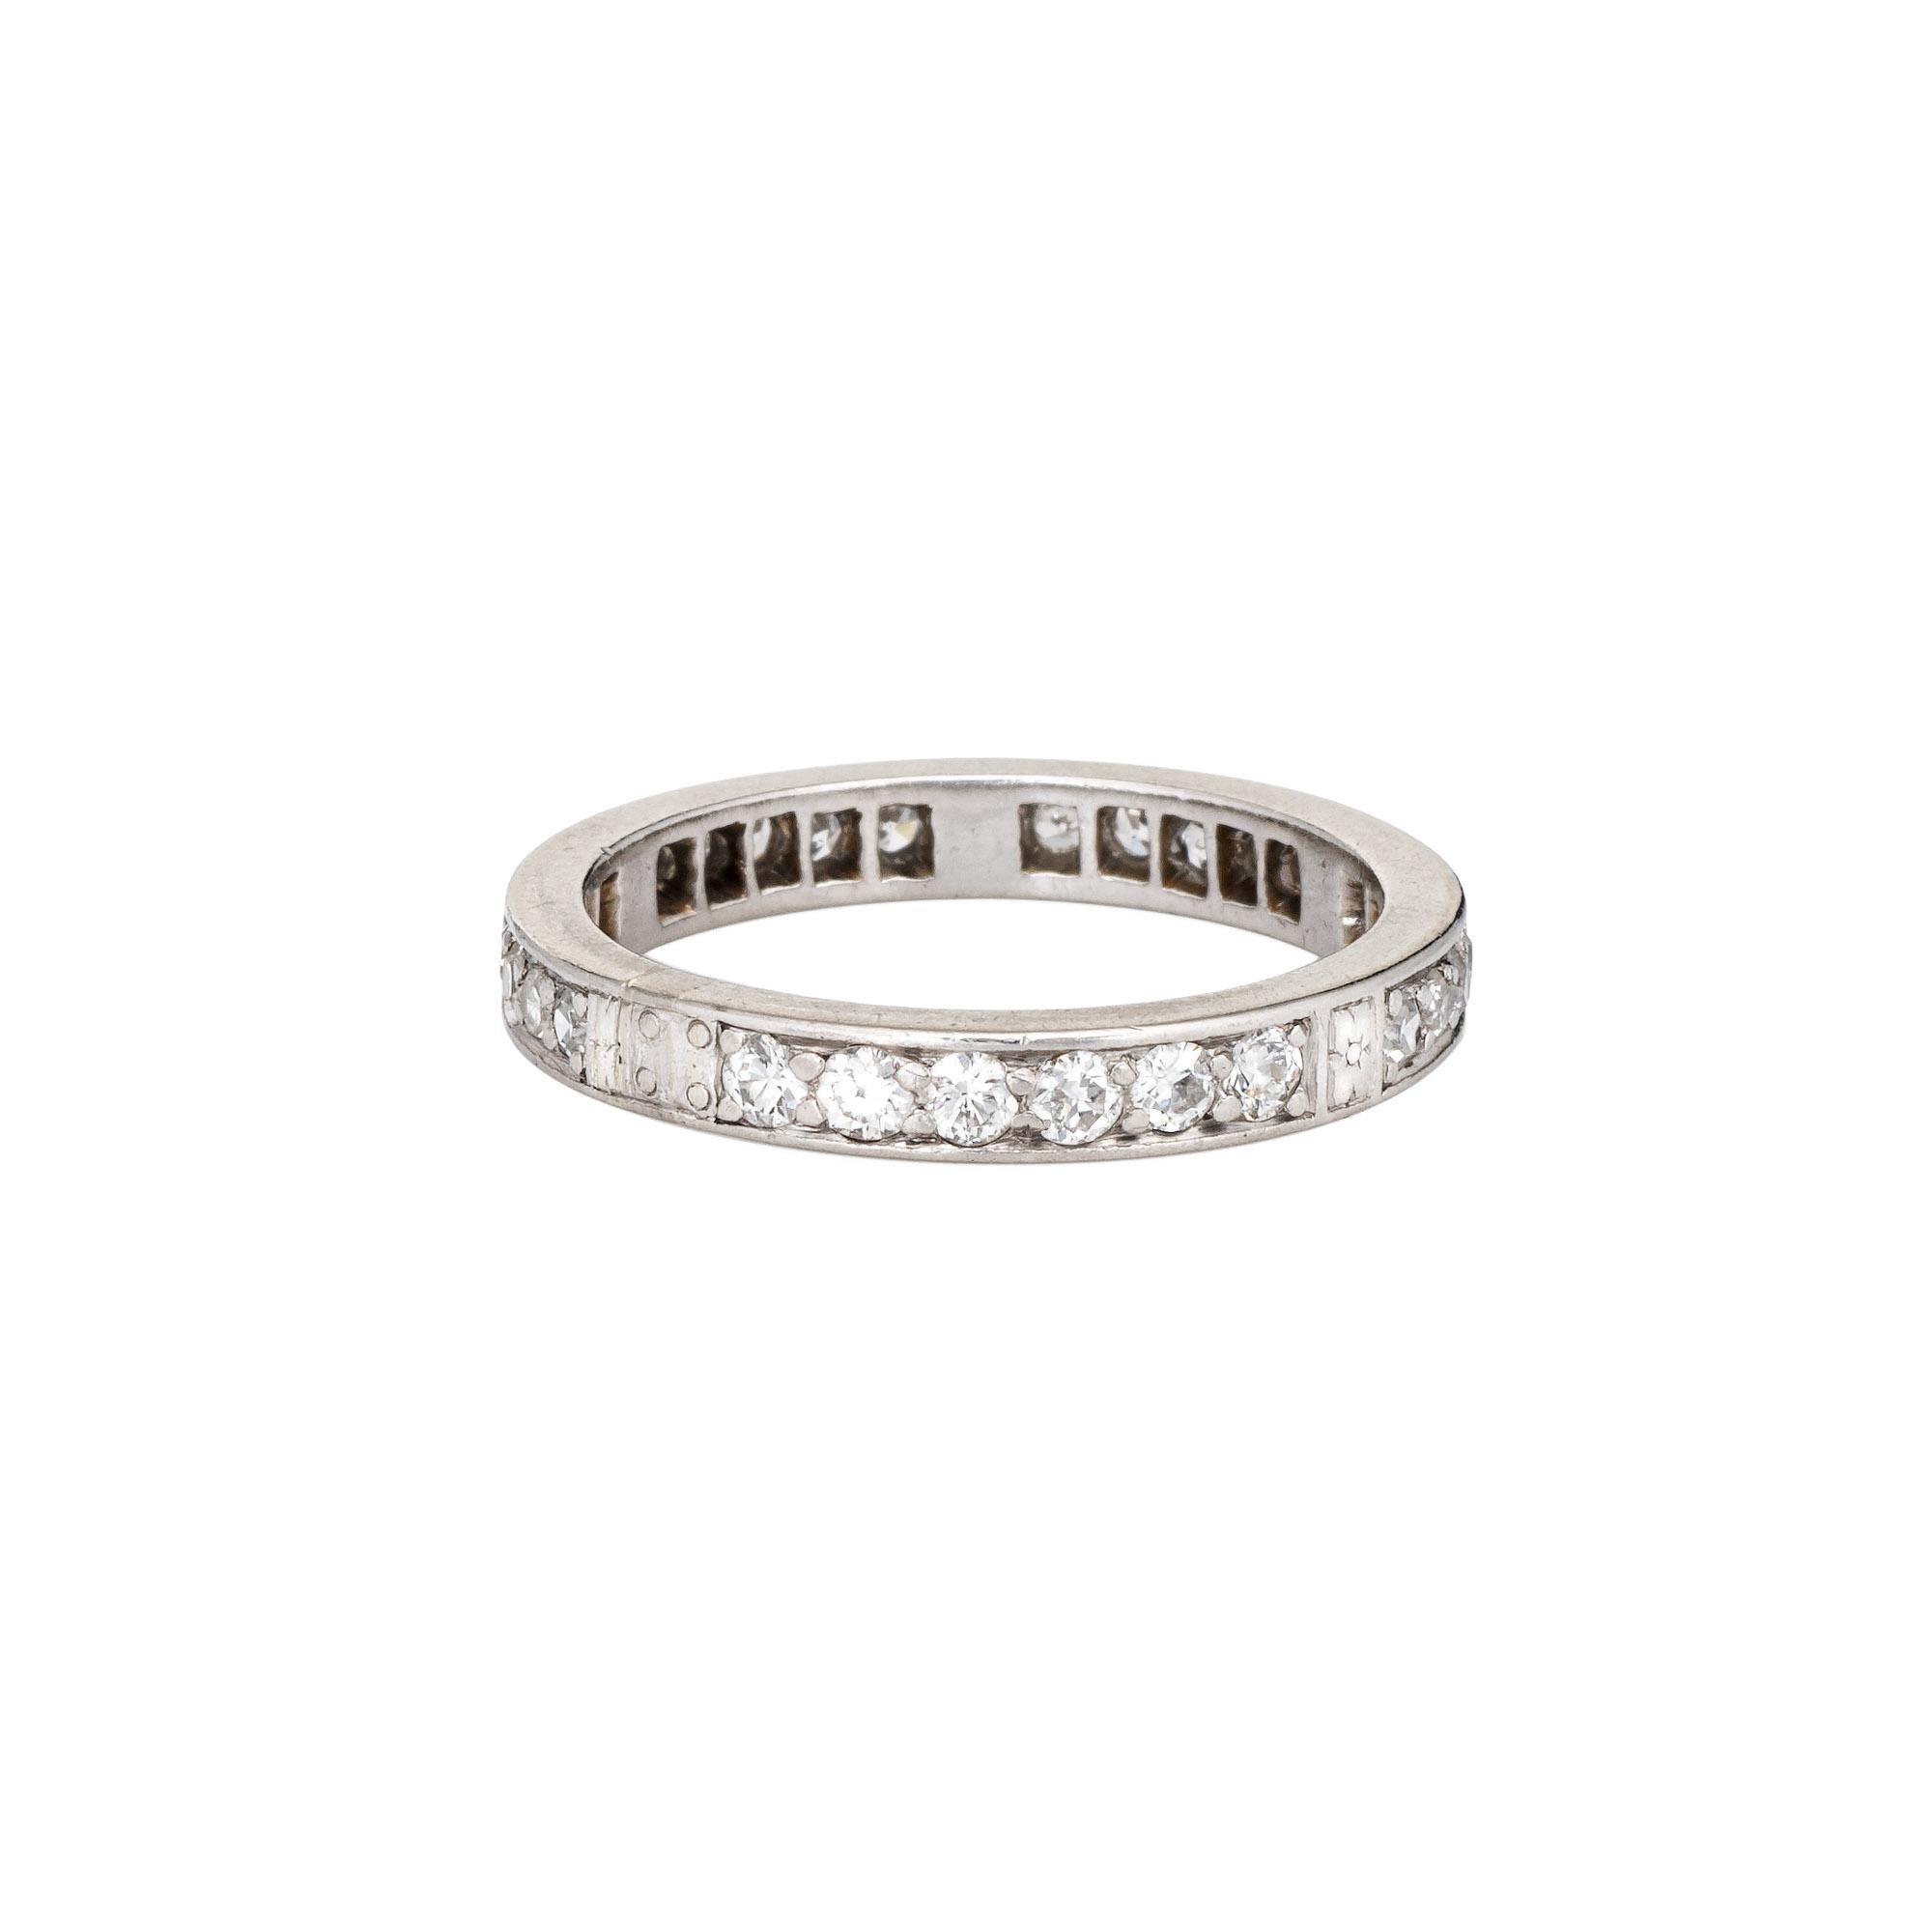 Finely detailed vintage Art Deco era diamond eternity ring (circa 1920s to 1930s), crafted in 900 platinum. 

Single & old European cut diamonds total an estimated 0.30 carats (estimated at H-I color and VS2-SI2 clarity). 

The band features five